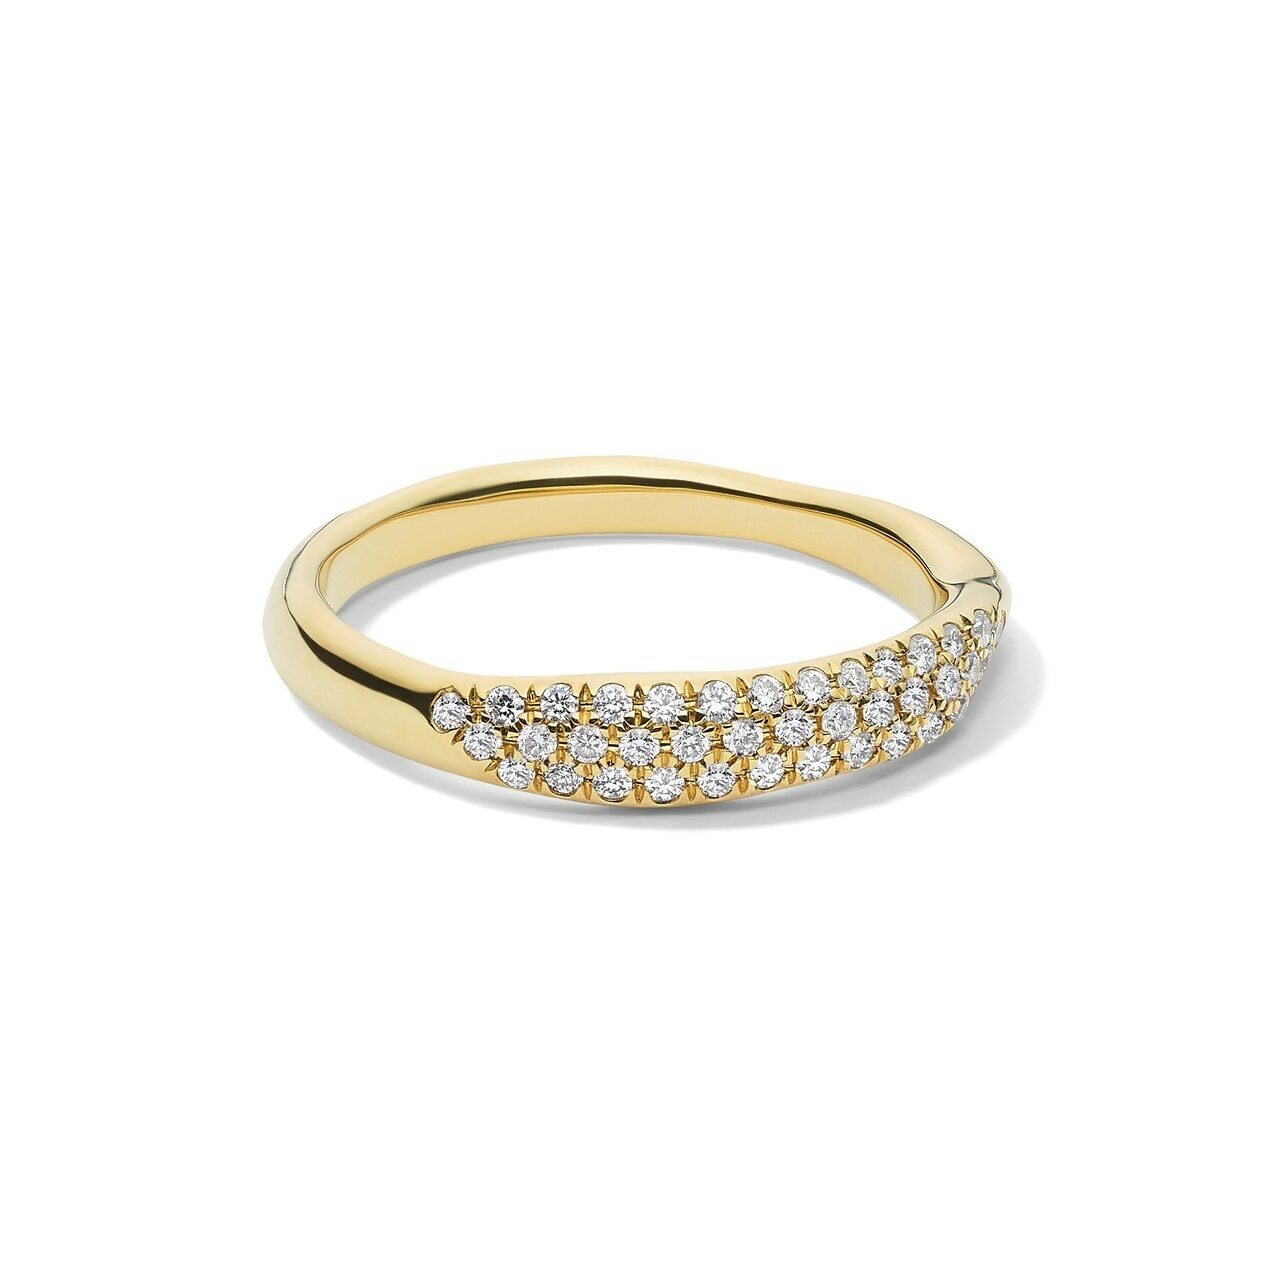 Squiggle Band Ring in 18K Gold with Diamonds